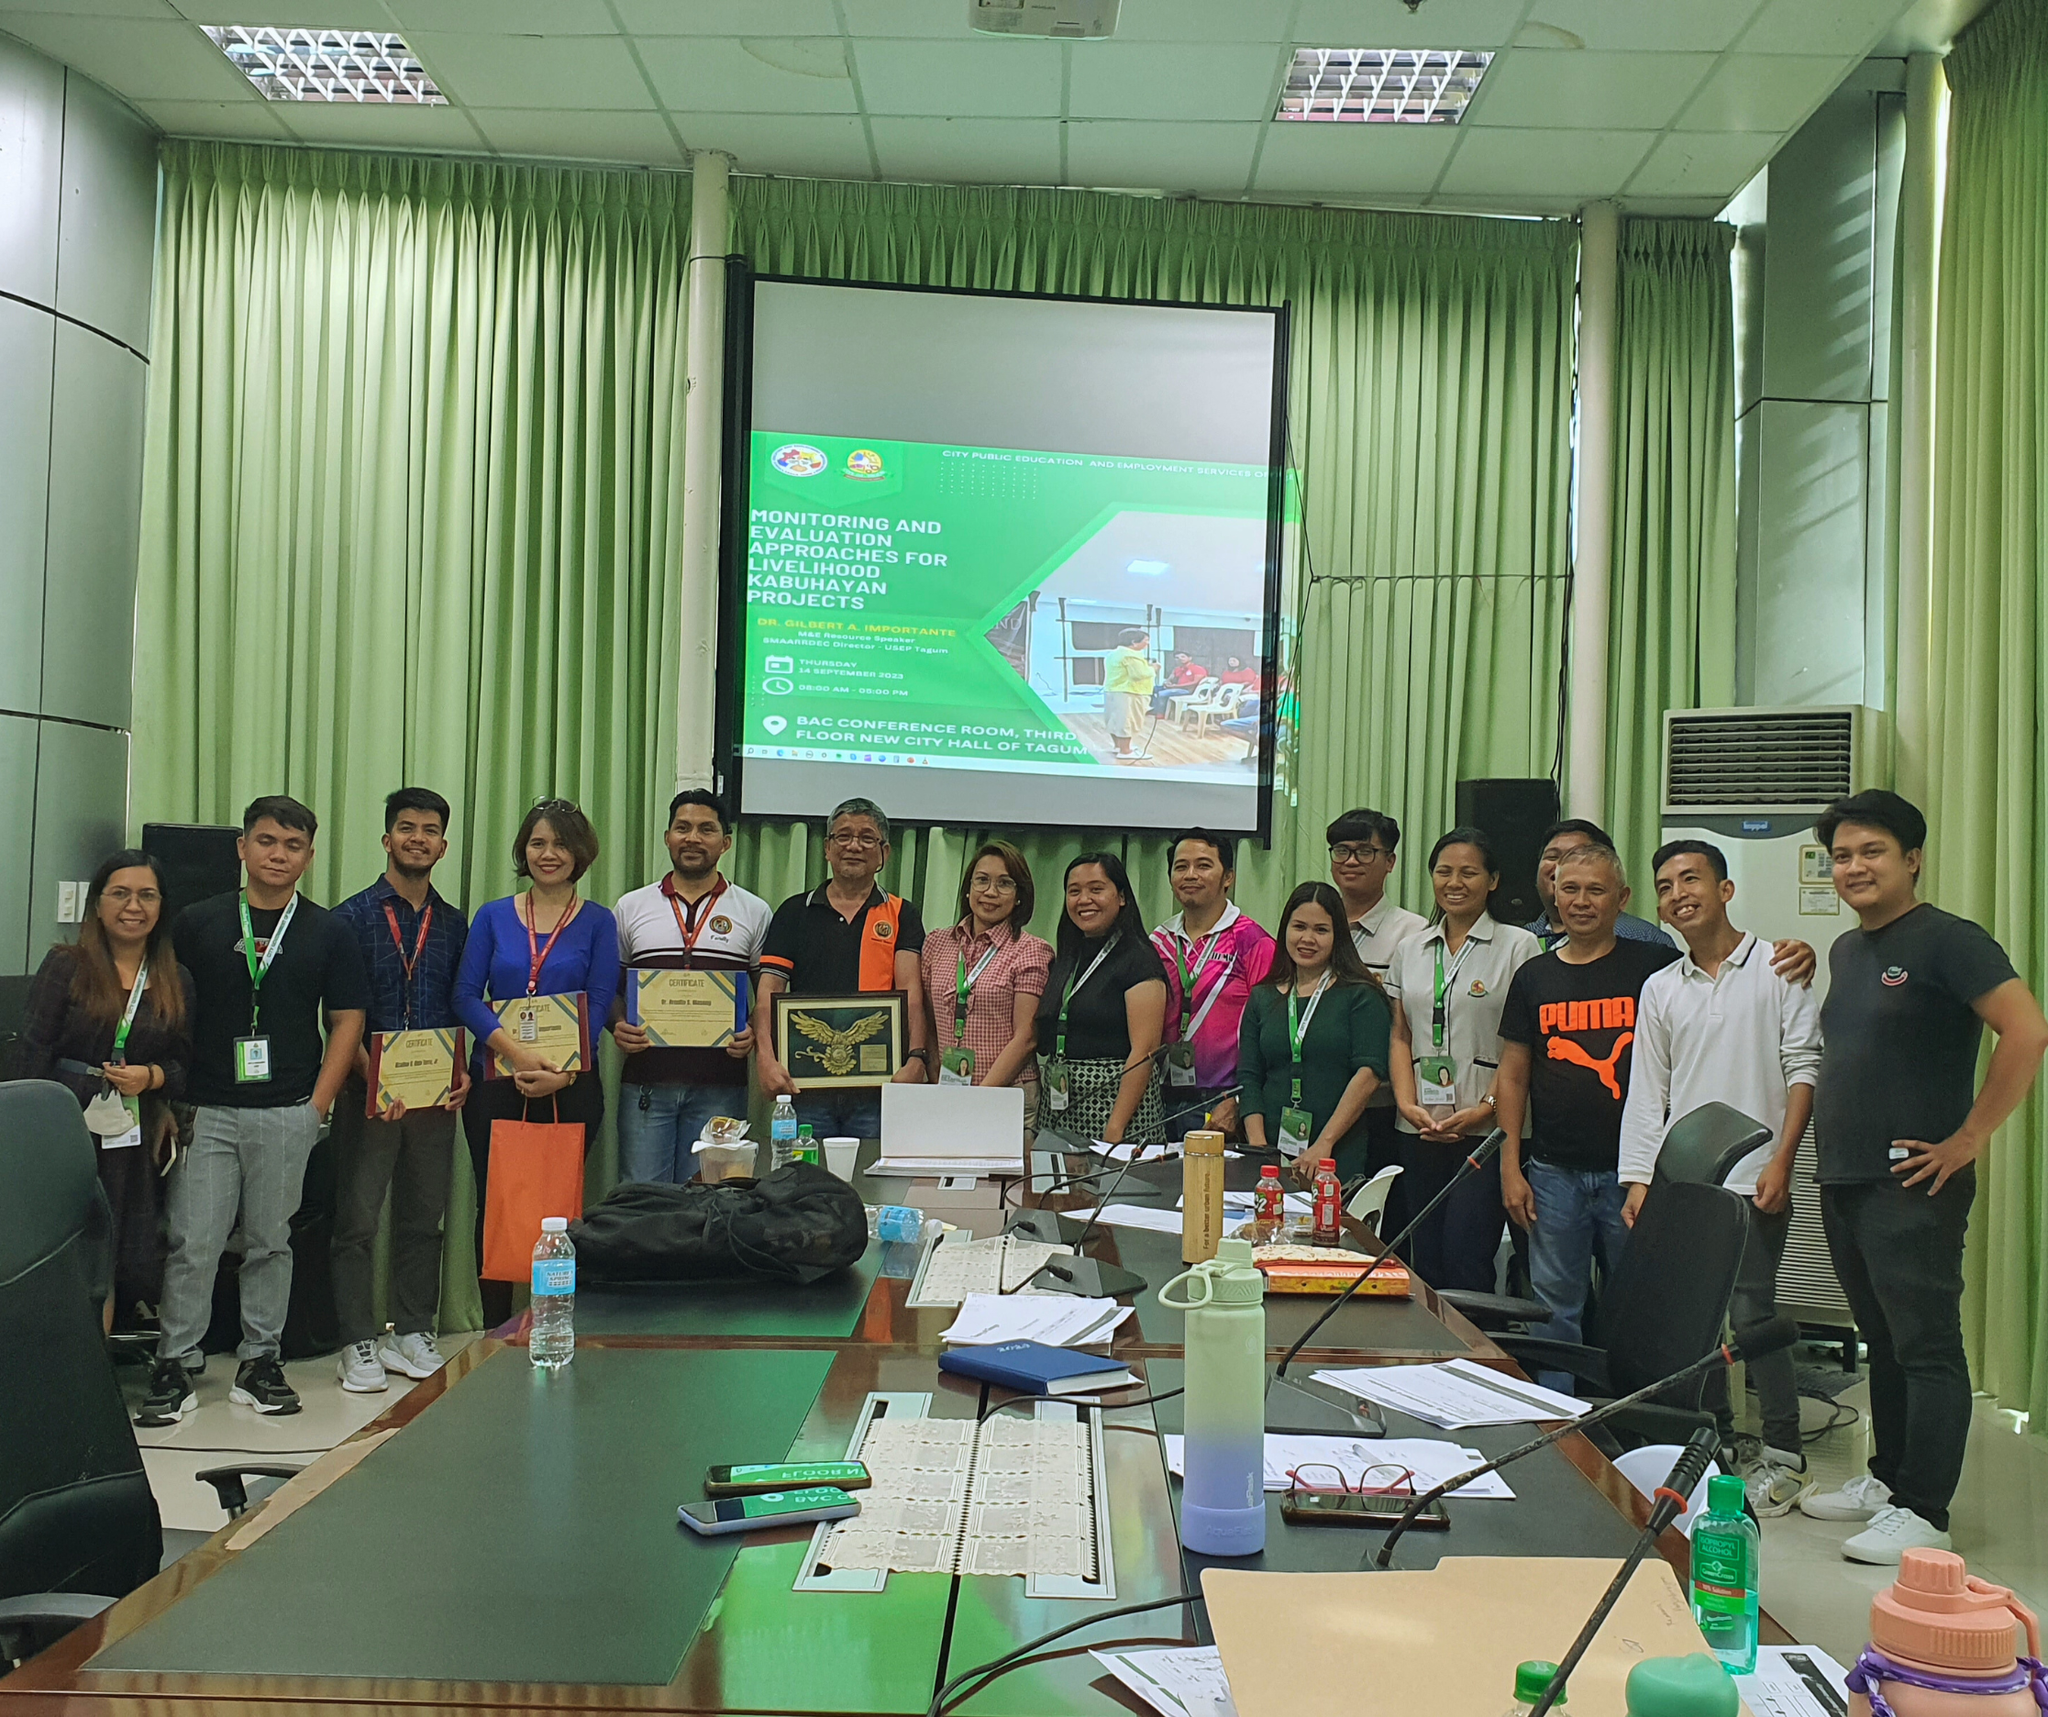 CTET Extension Office Conducted A Training On Monitoring and Evaluation Approaches for Livelihood Kabuhayan Projects